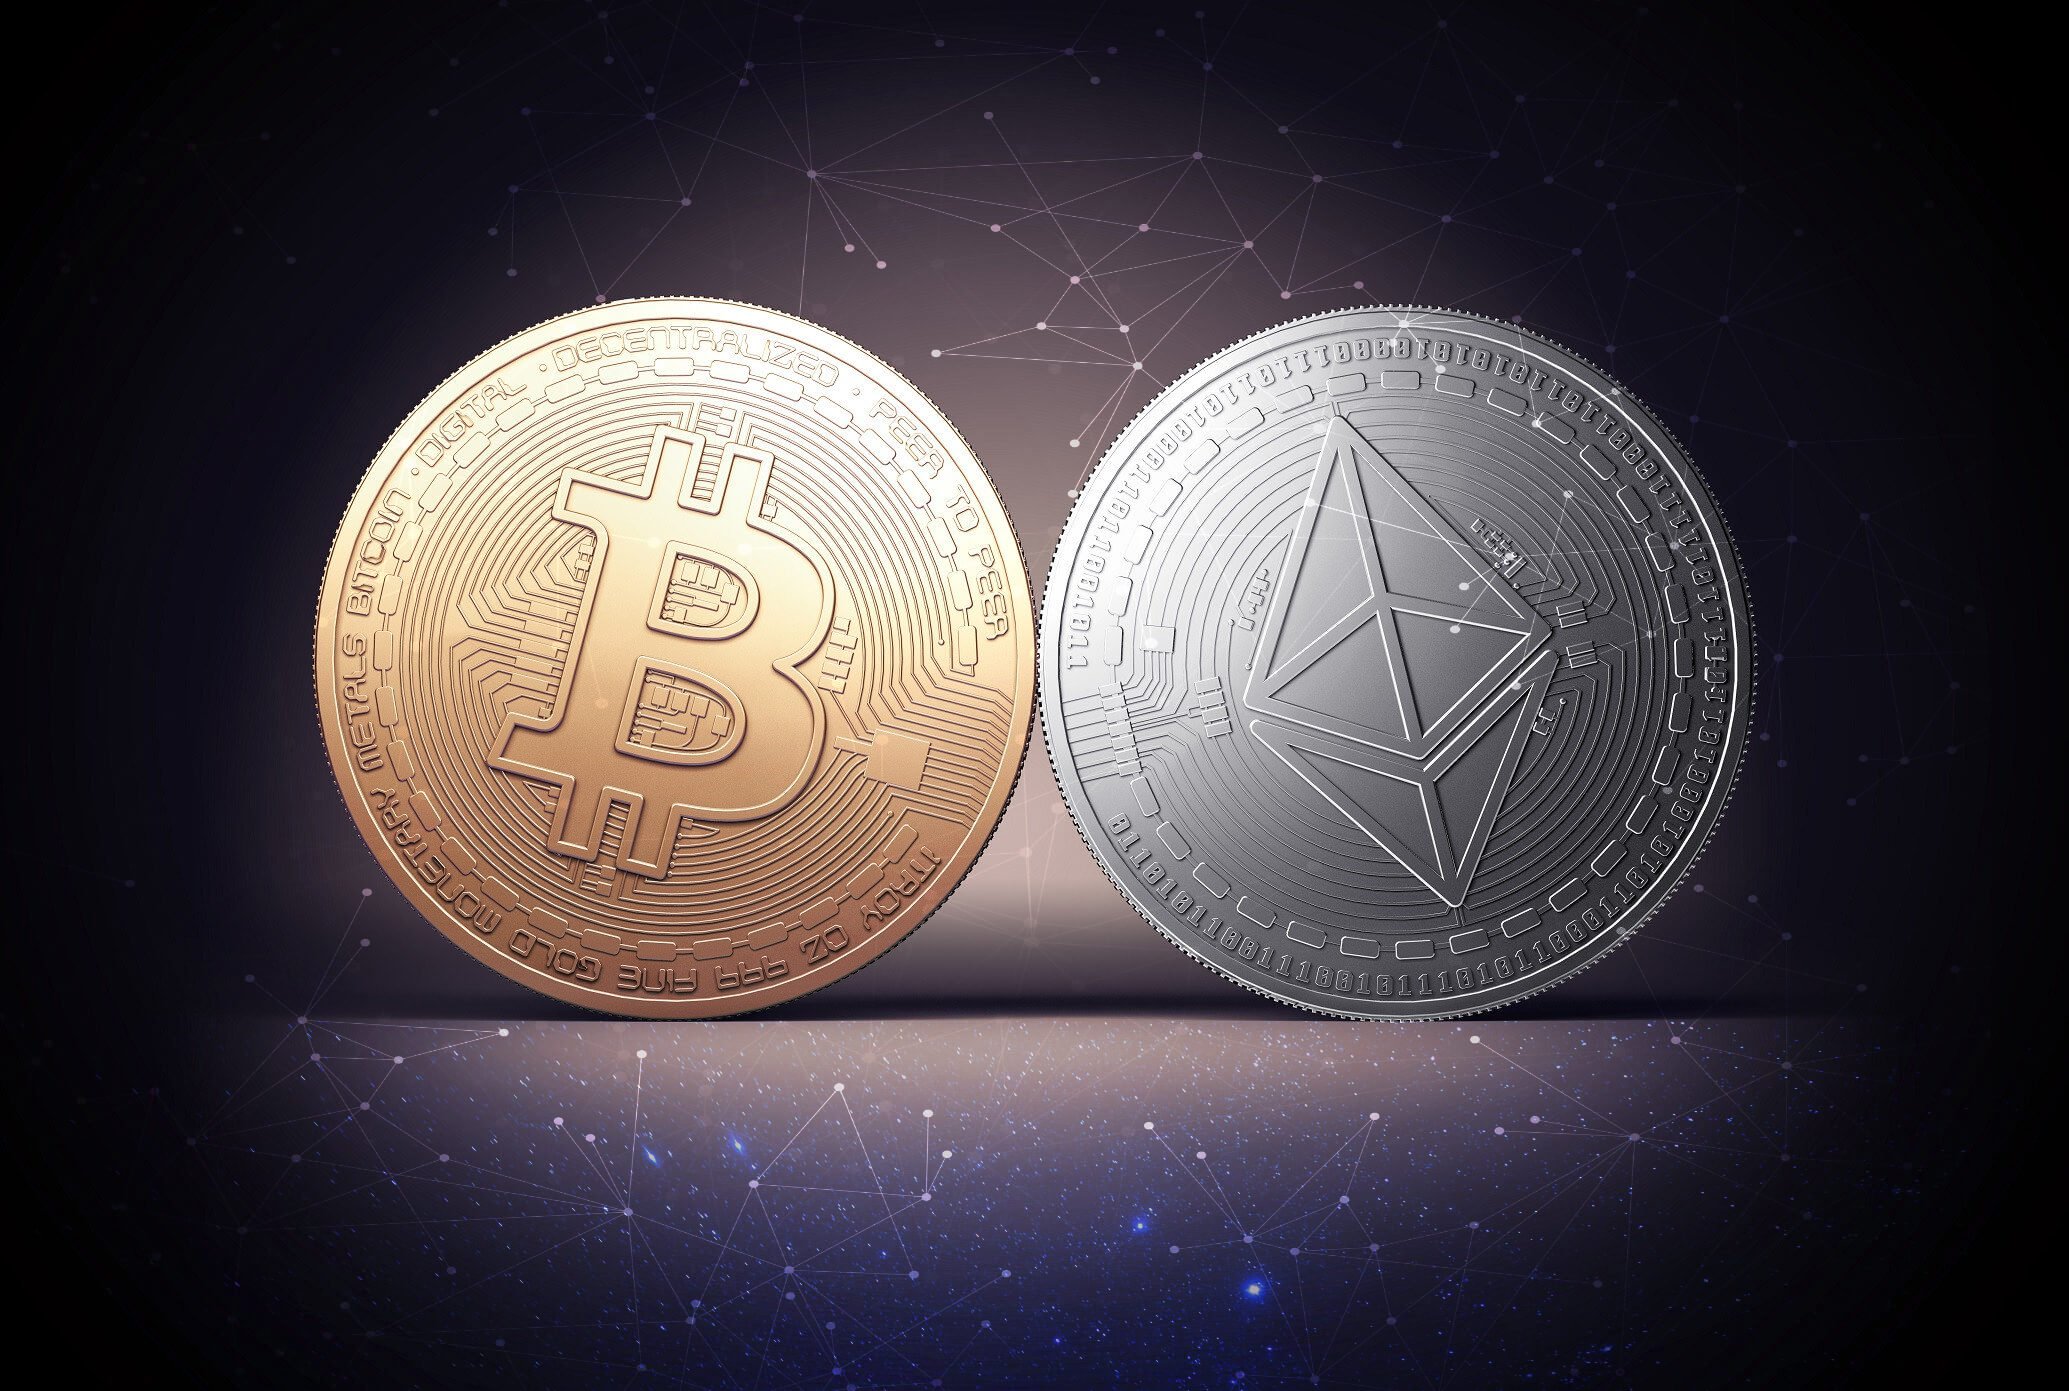 bitcoin or ethereum